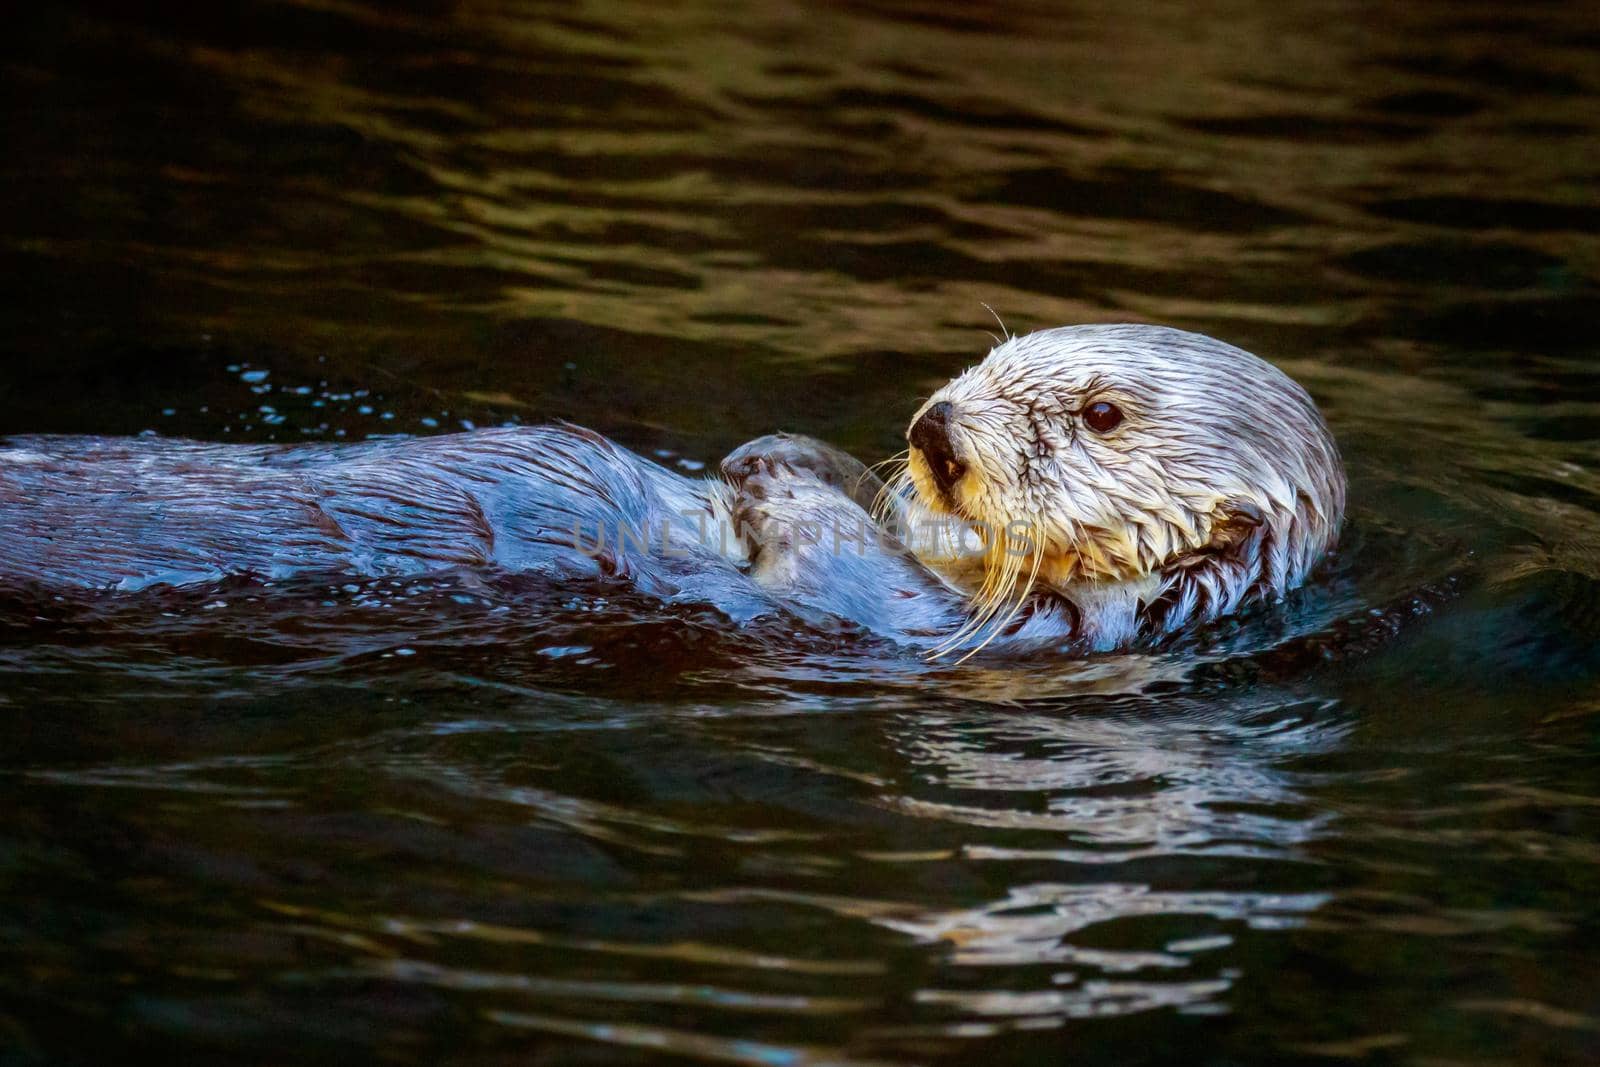 Southern Sea Otter by gepeng